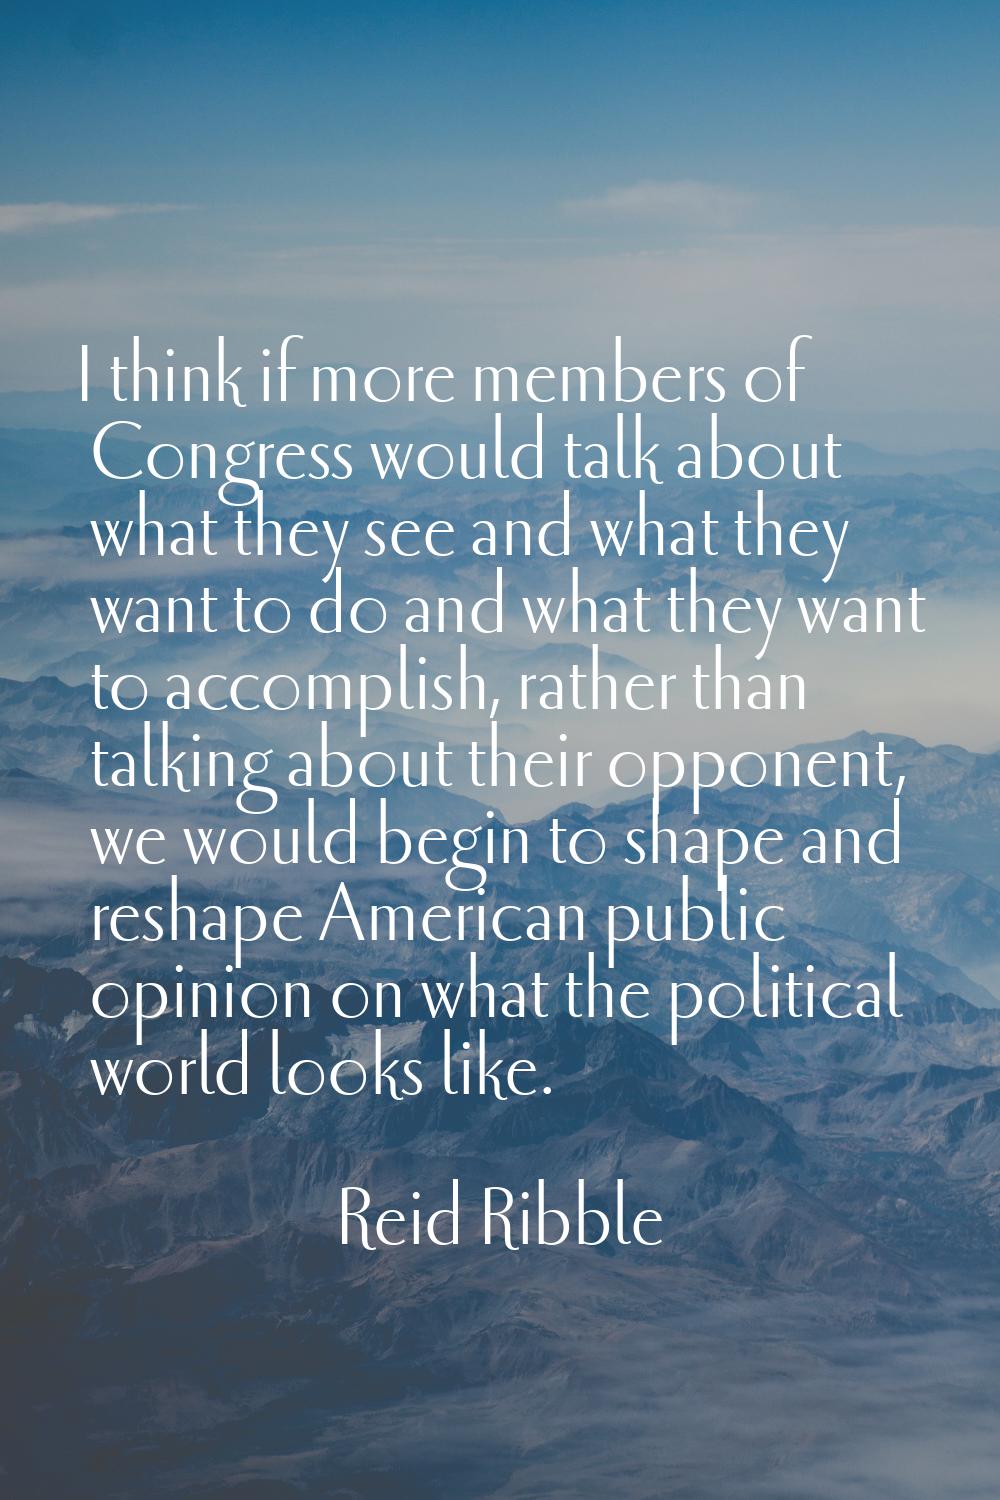 I think if more members of Congress would talk about what they see and what they want to do and wha